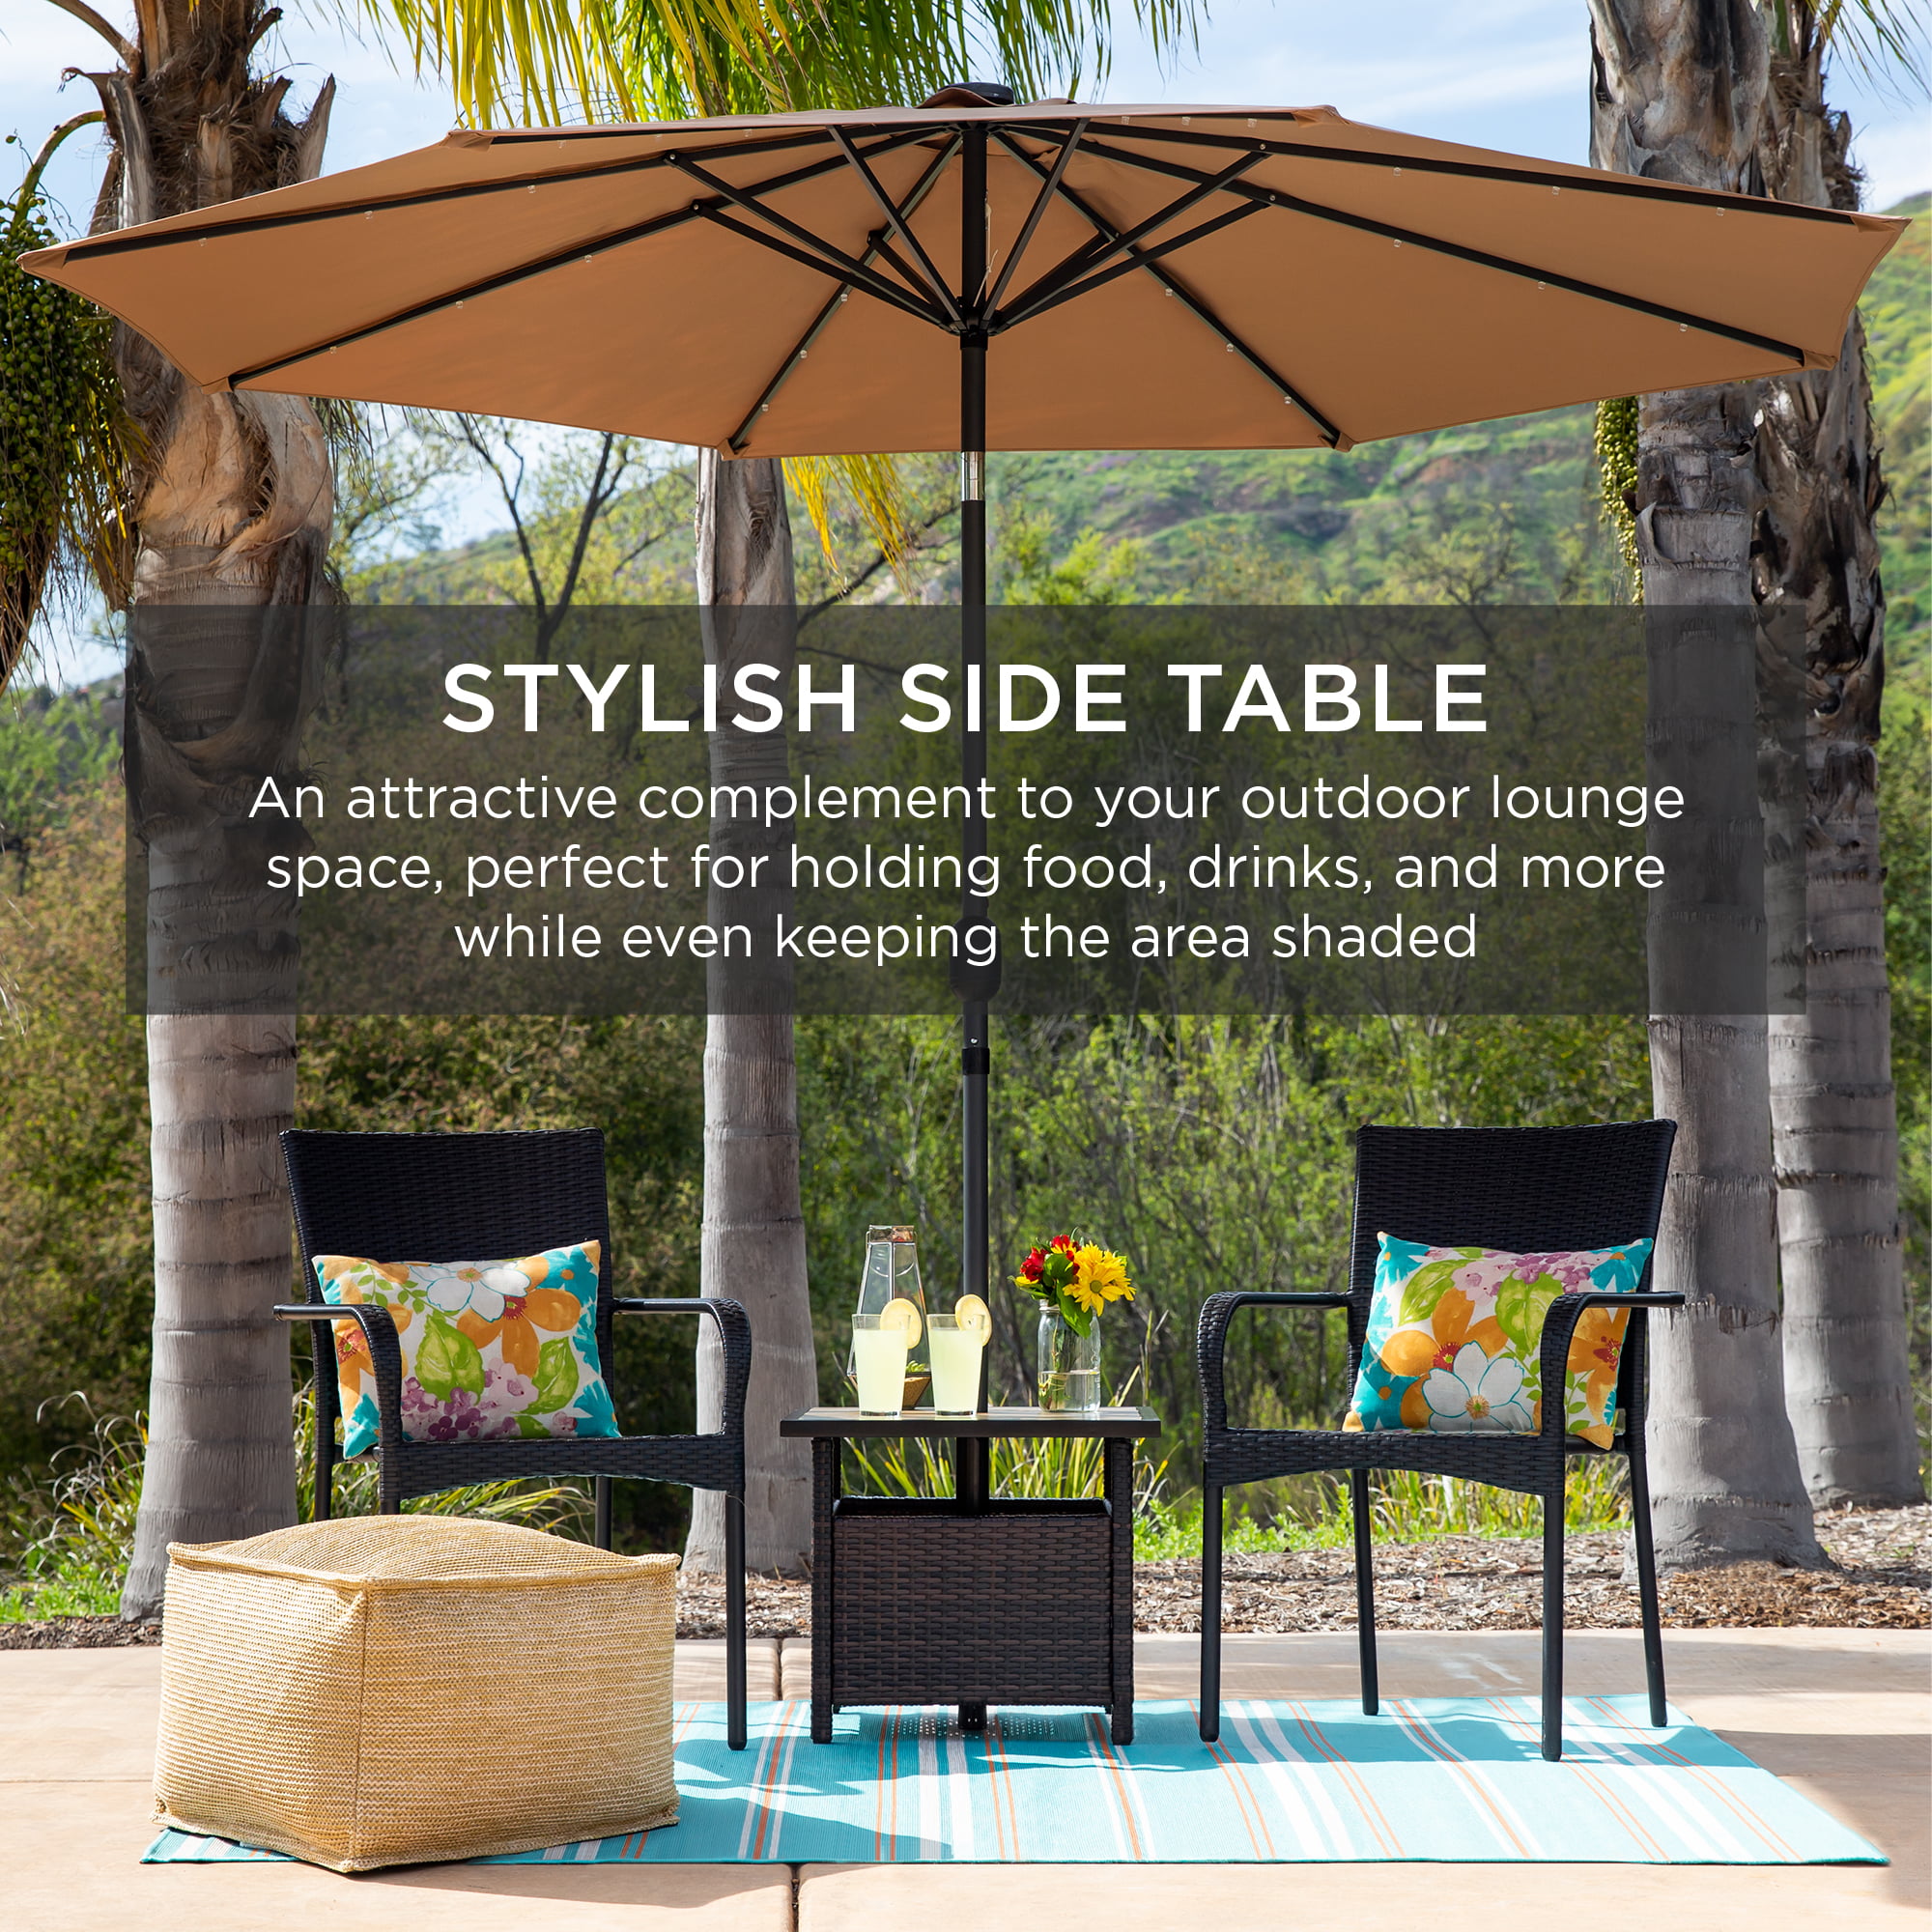 ReunionG Patio Umbrella Side Table Rattan Wicker Stand Table with Umbrella Hole Steel for Outdoor Deck Garden Pool